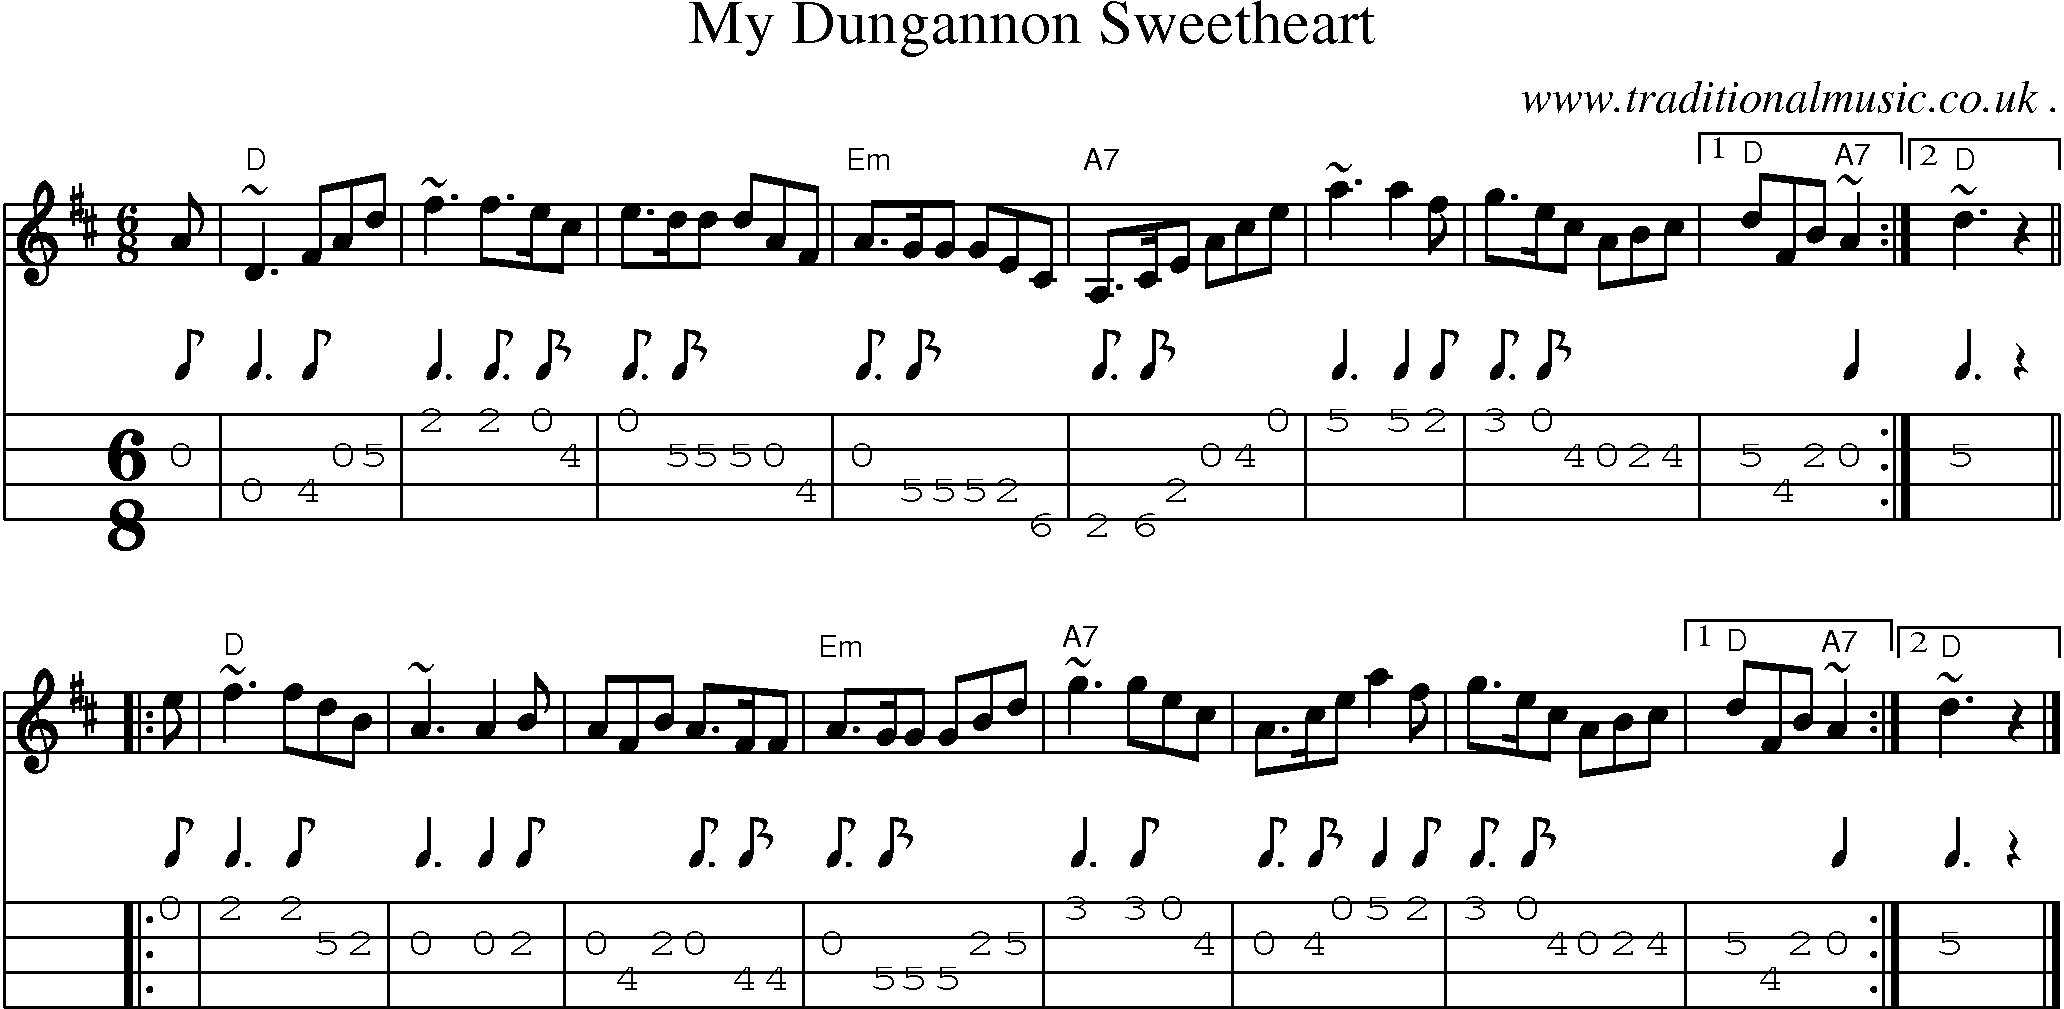 Sheet-music  score, Chords and Mandolin Tabs for My Dungannon Sweetheart